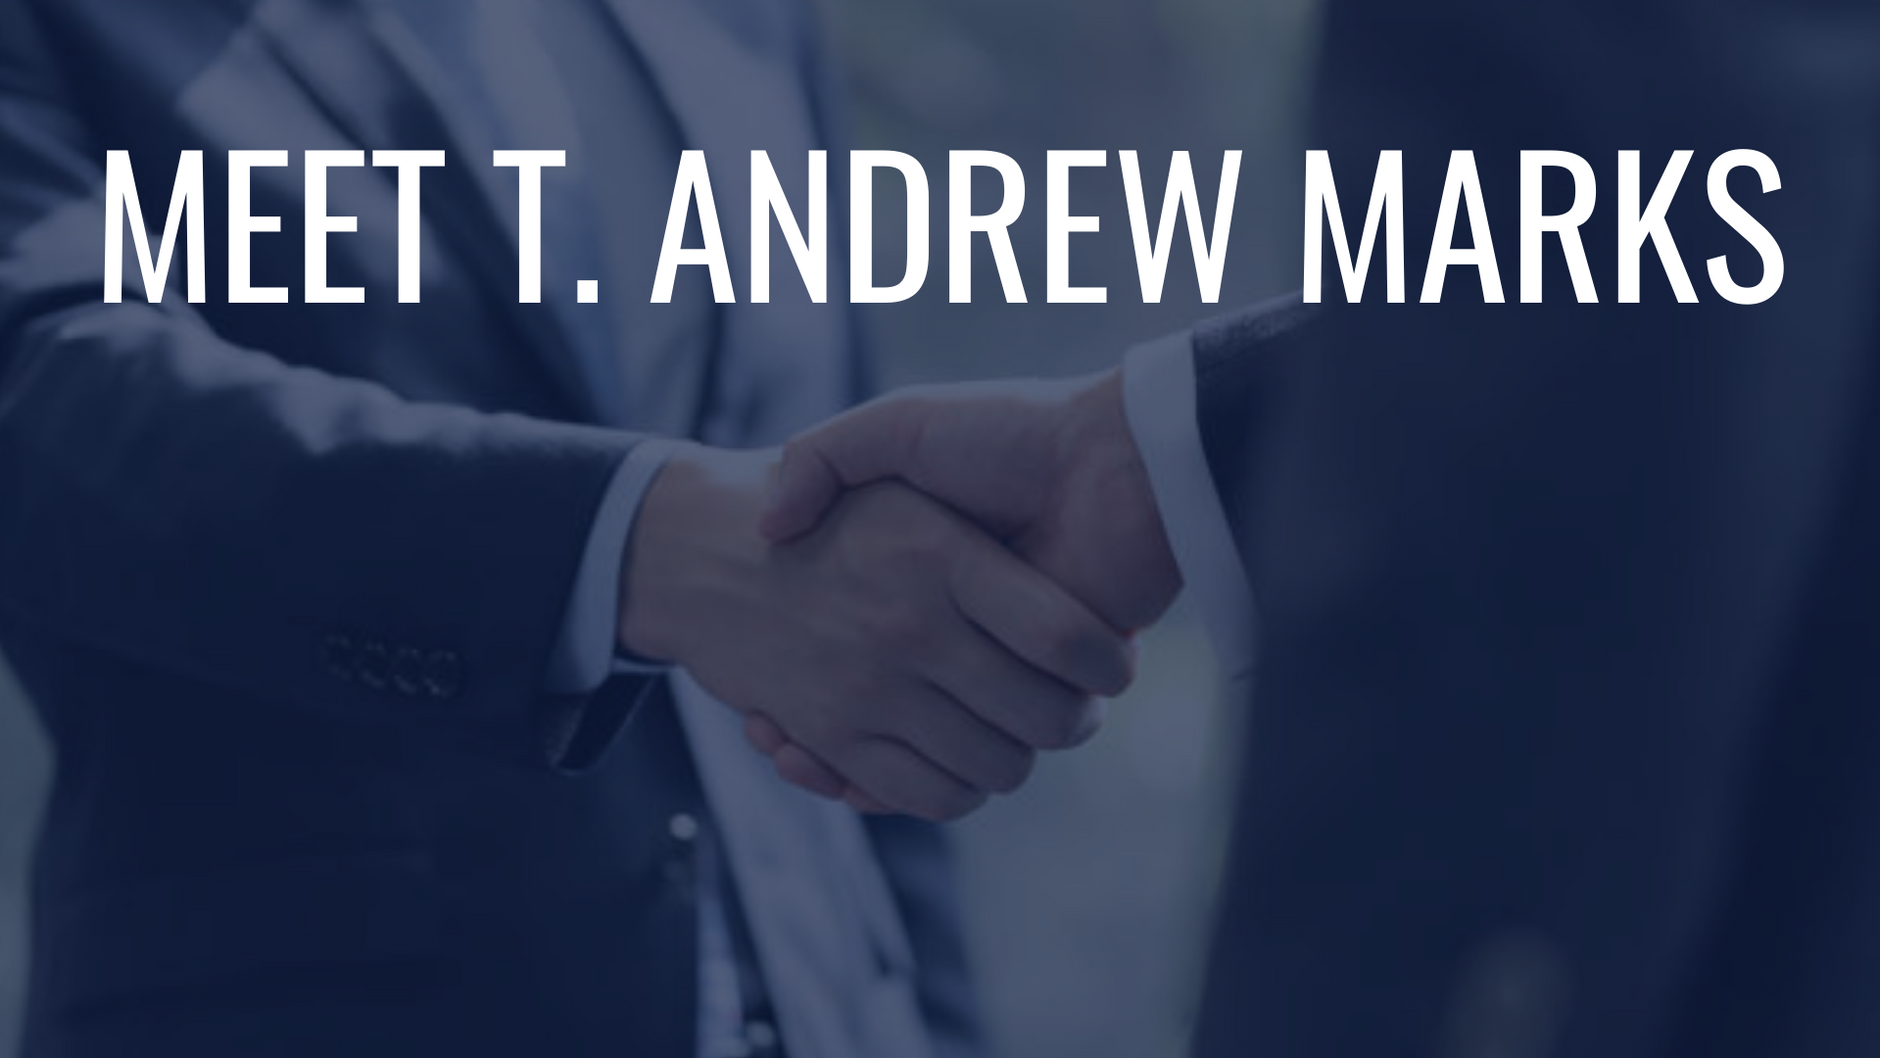 Learn More with Andrew